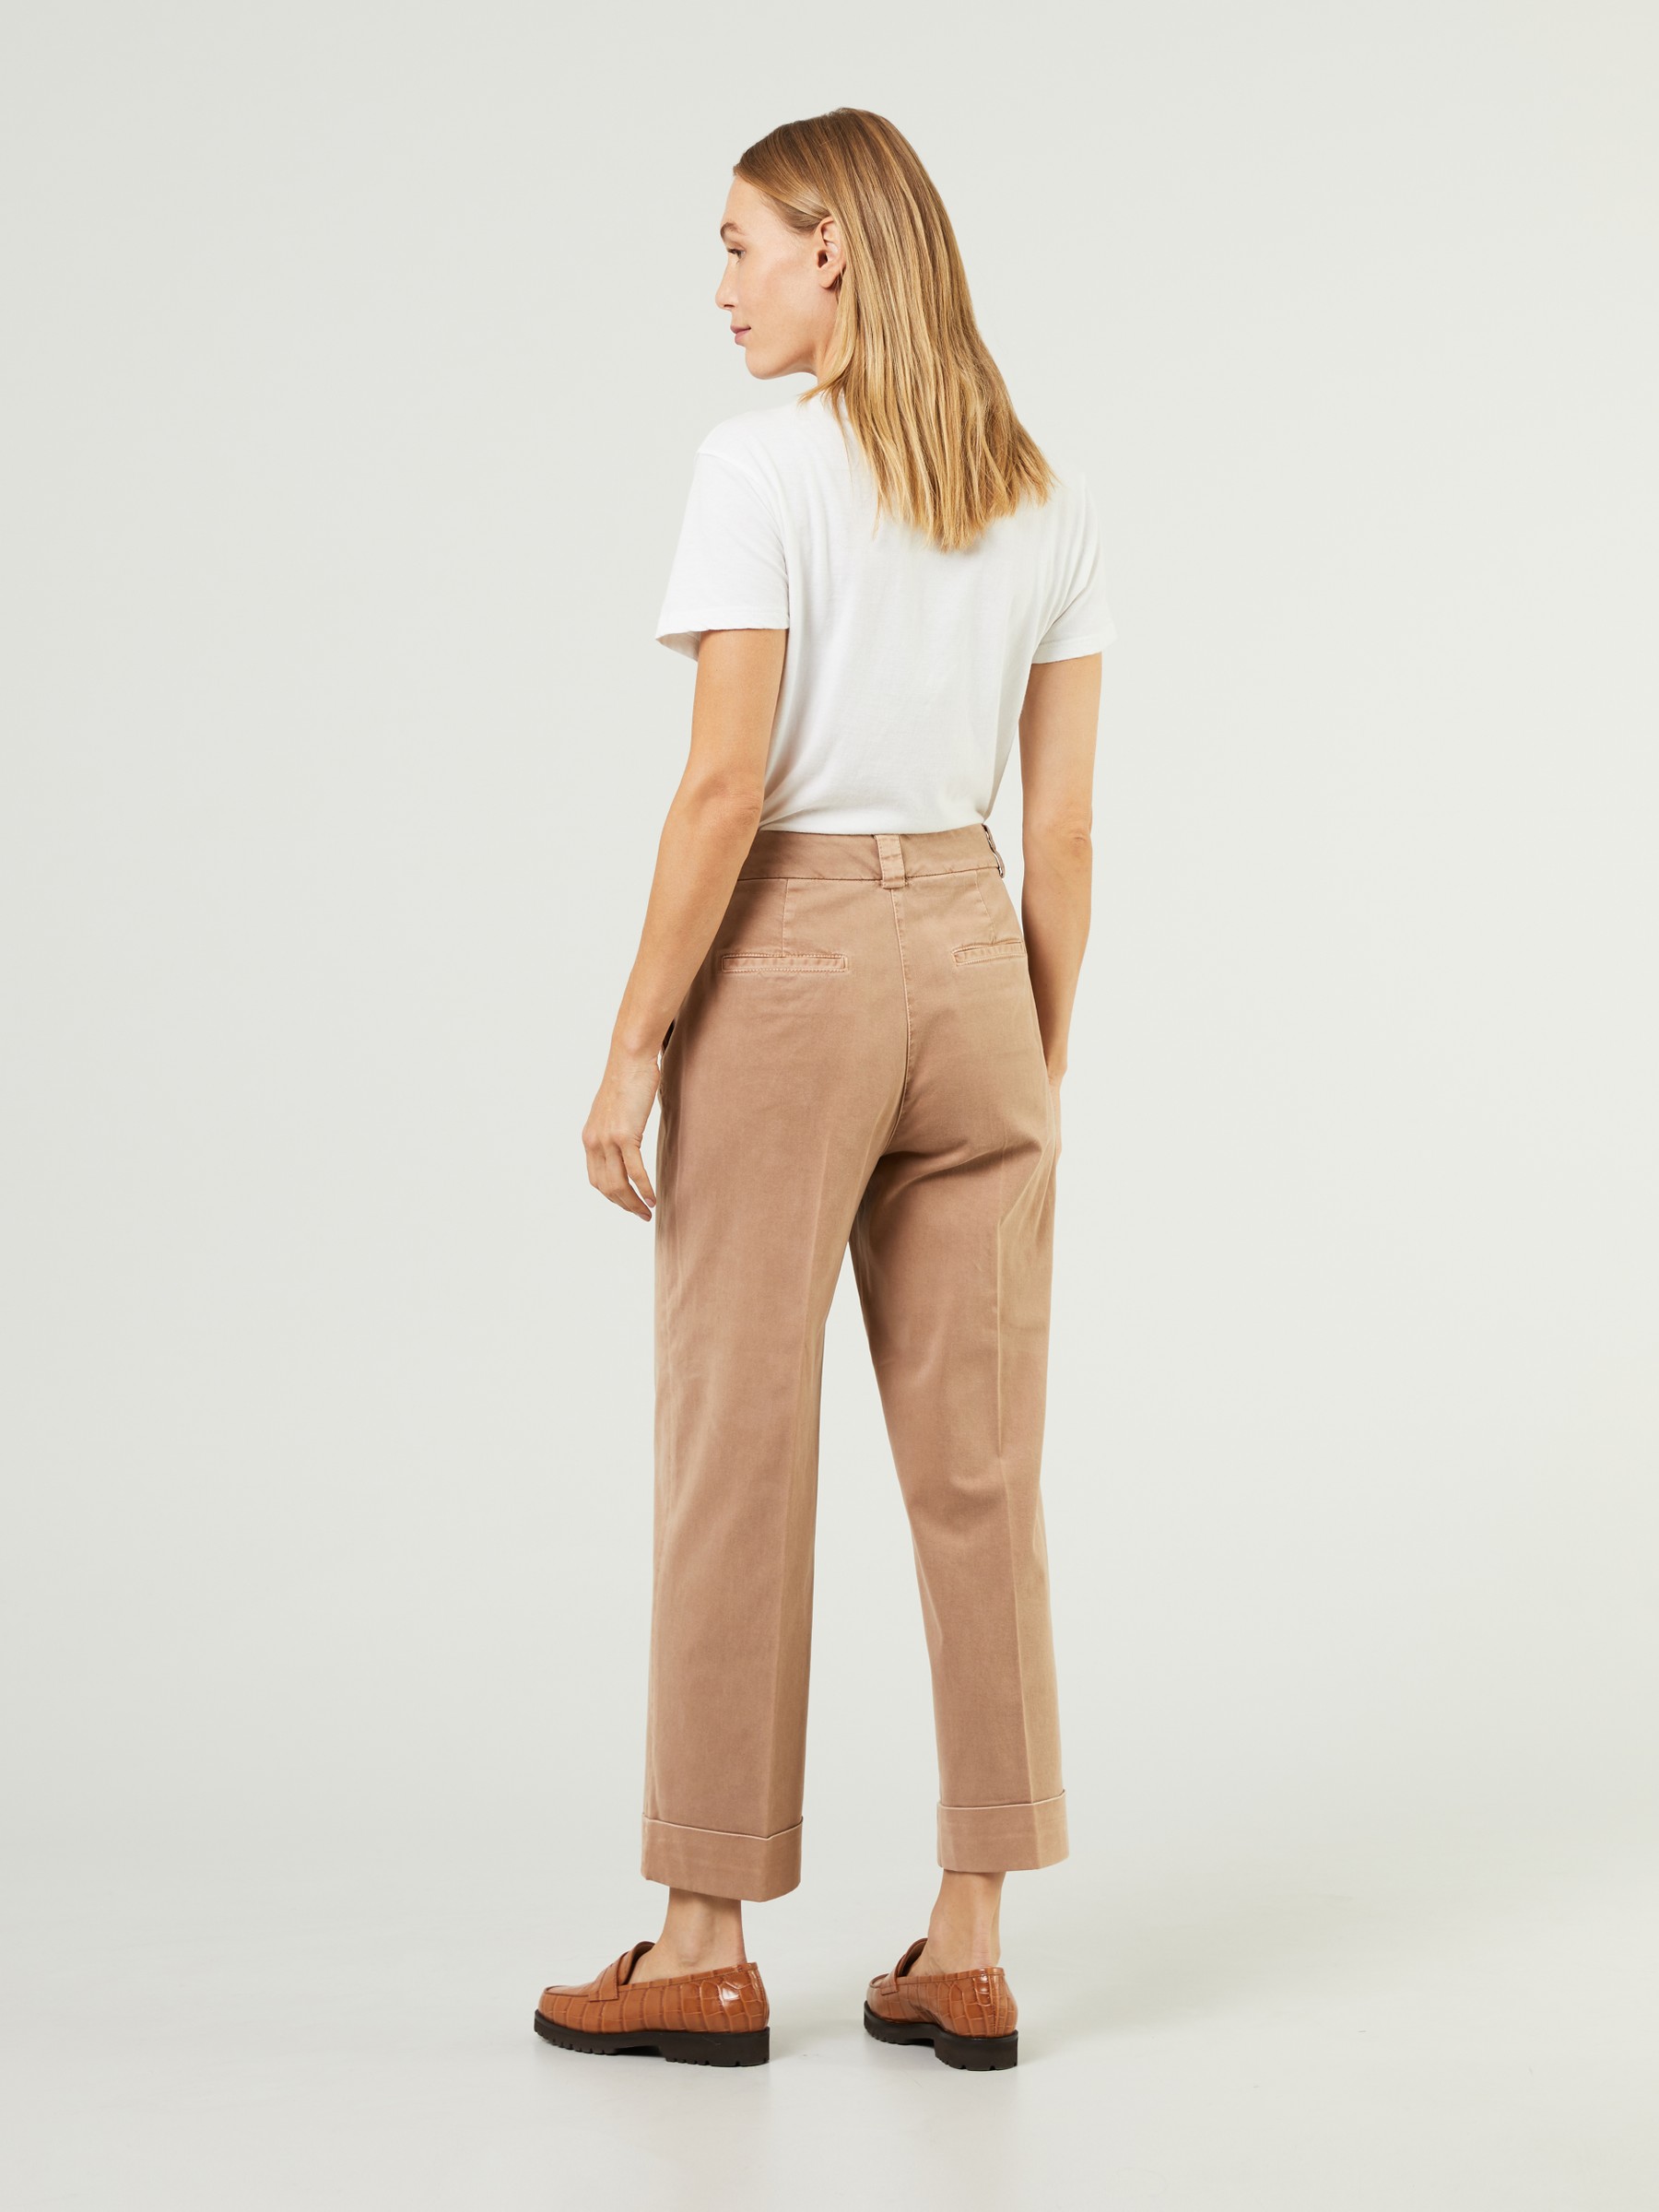 Slacks and Chinos Peserico Trousers Womens Trousers Peserico Cotton Trouser in Beige Natural Slacks and Chinos 